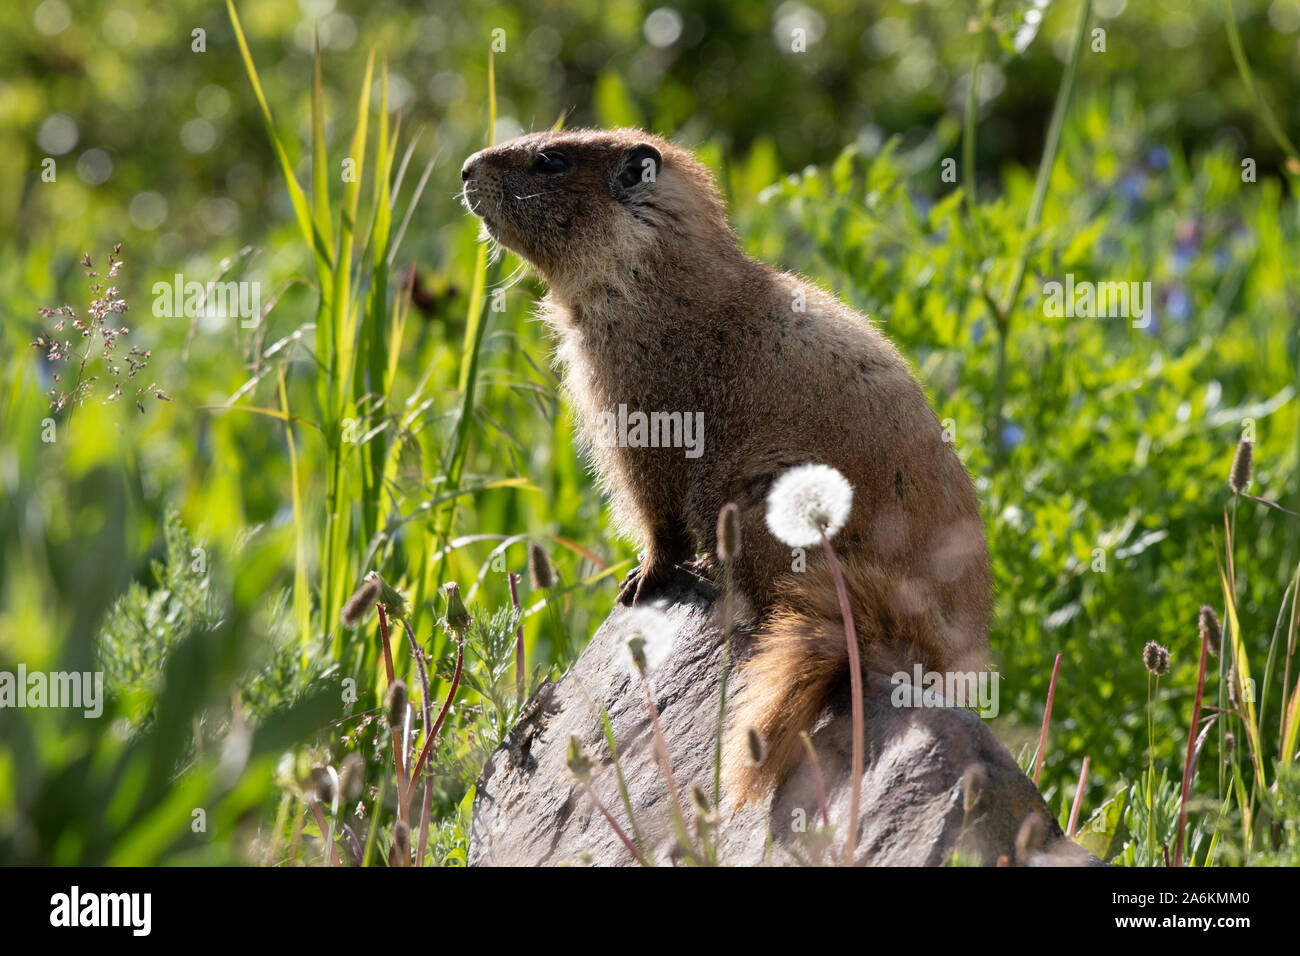 A Yellow-bellied Marmot Perched on a Rock Stock Photo